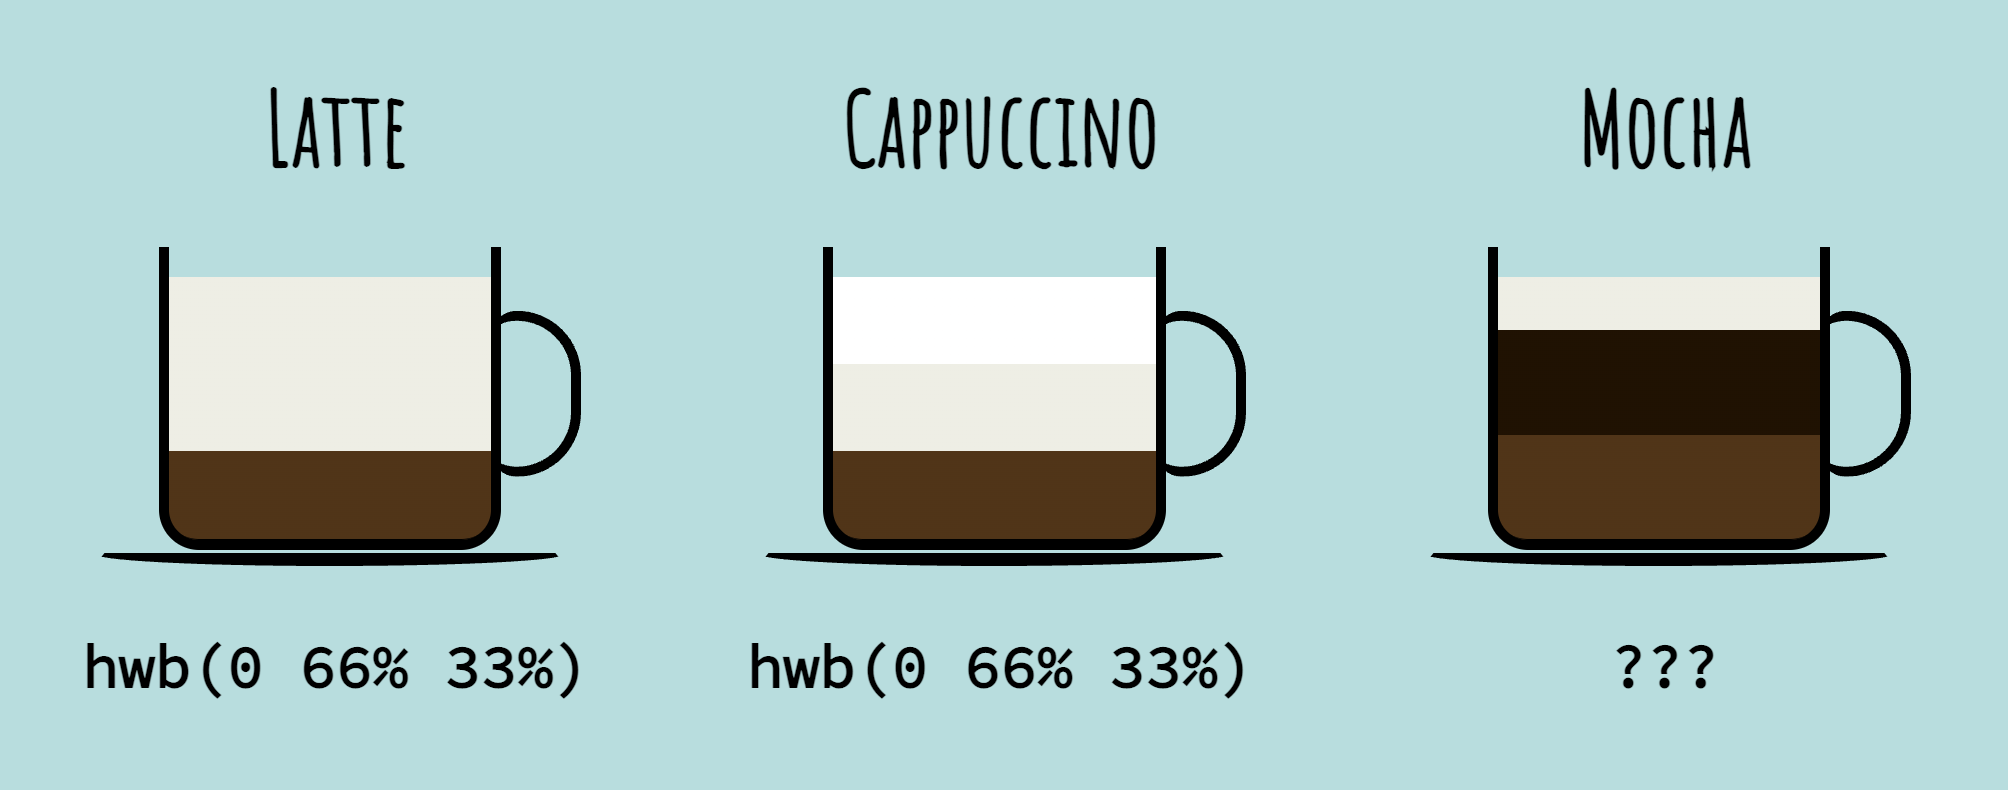 detail of the previous cartoon showing latte and cappuccino along with mocha